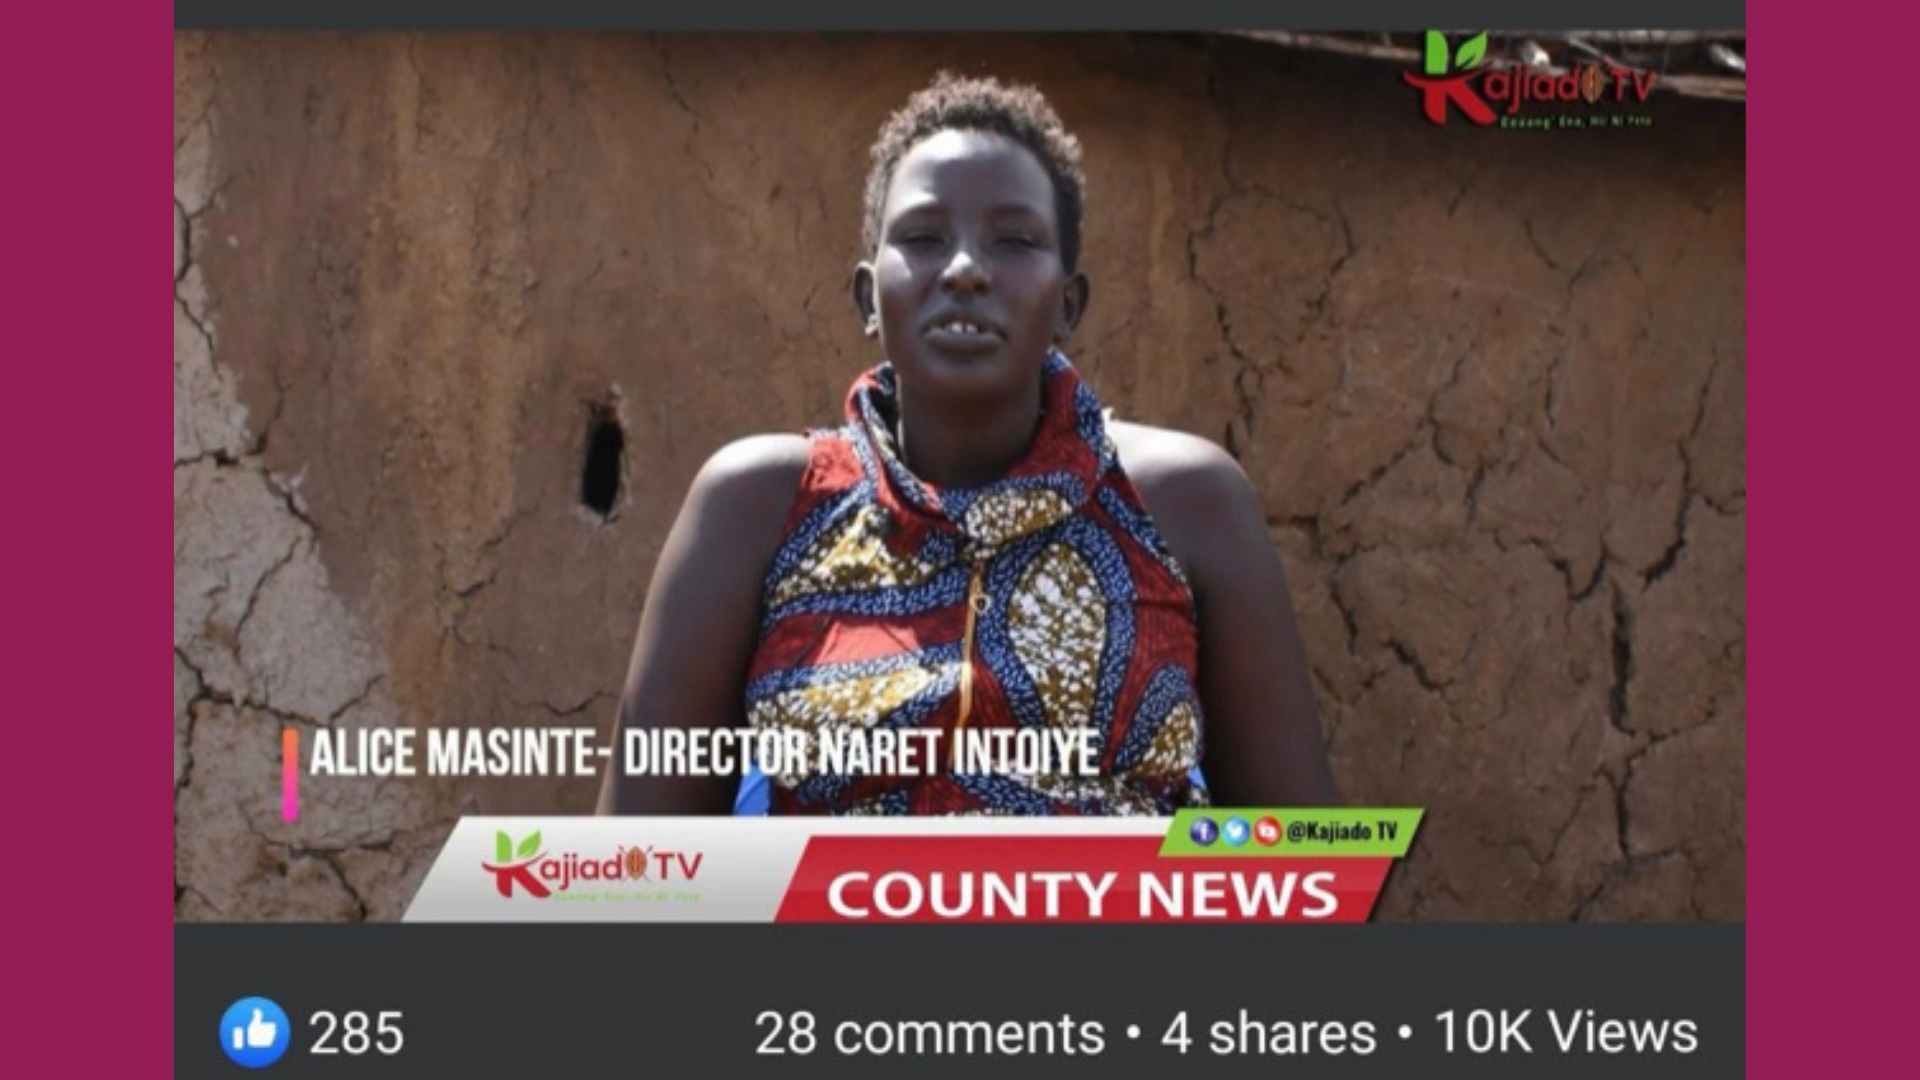 Read more about the article Kajiado TV broadcast chief, campaigner, and ex-cutter on how to end FGM in Kajiado County, Kenya 